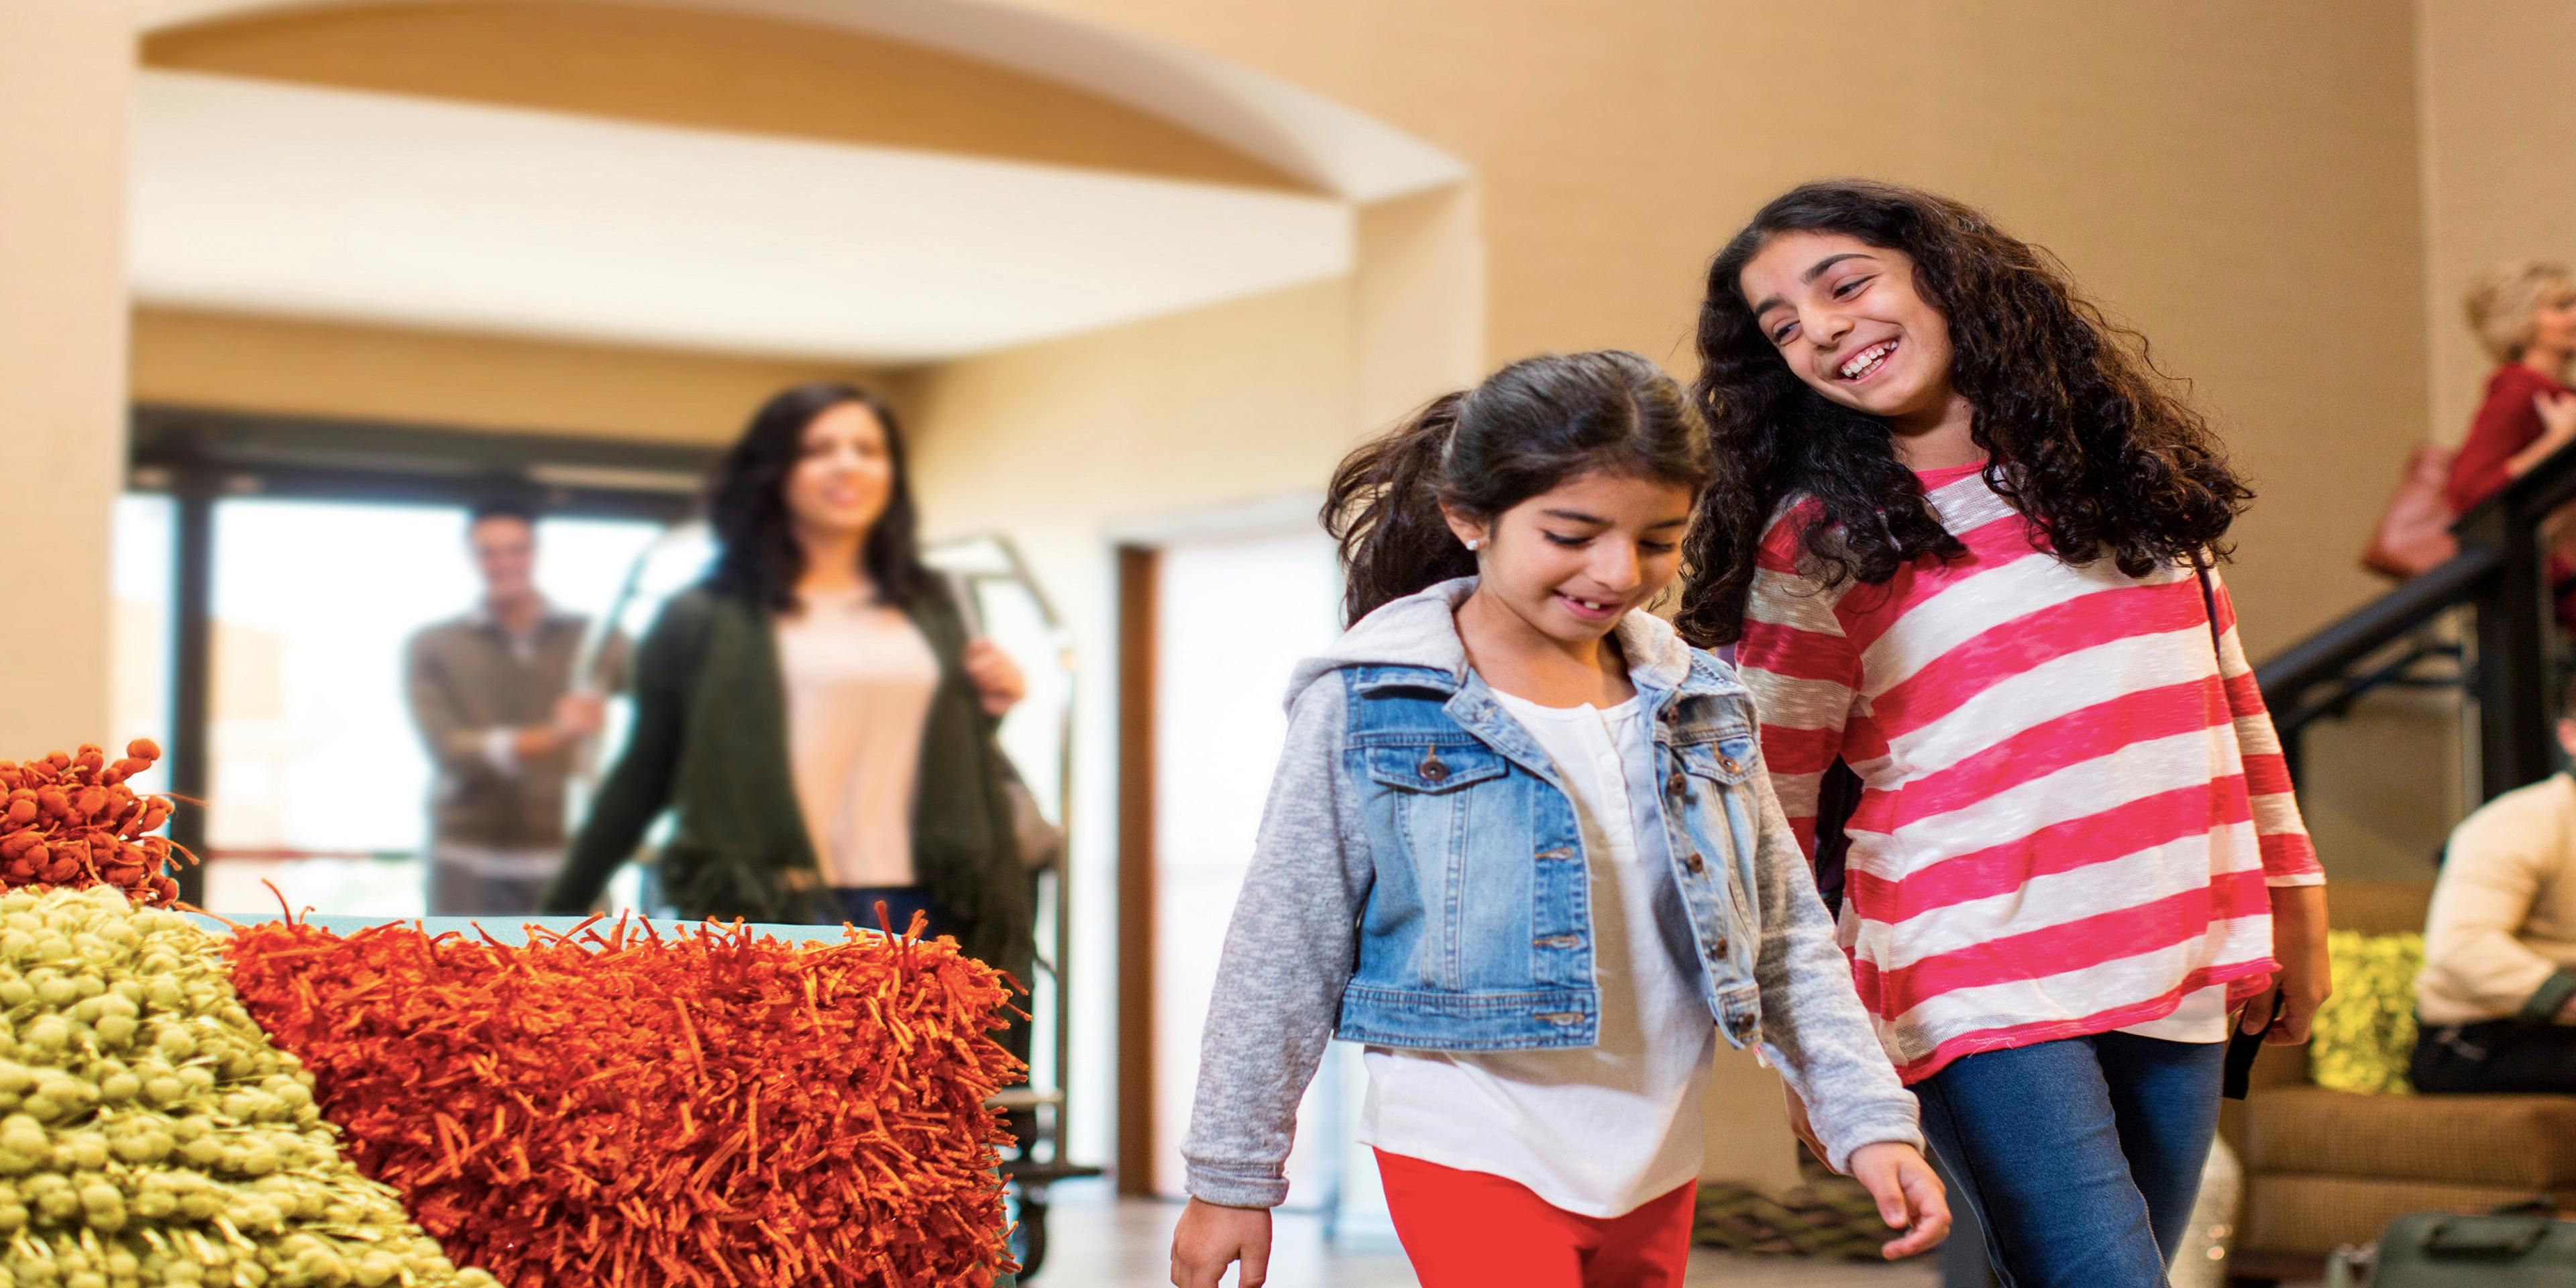 Book your stay at the Holiday Inn Express & Suites Santa Ana - Orange County and benefit from our great location near Disneyland, Newport Beach, Knotts Berry Farm and more. 